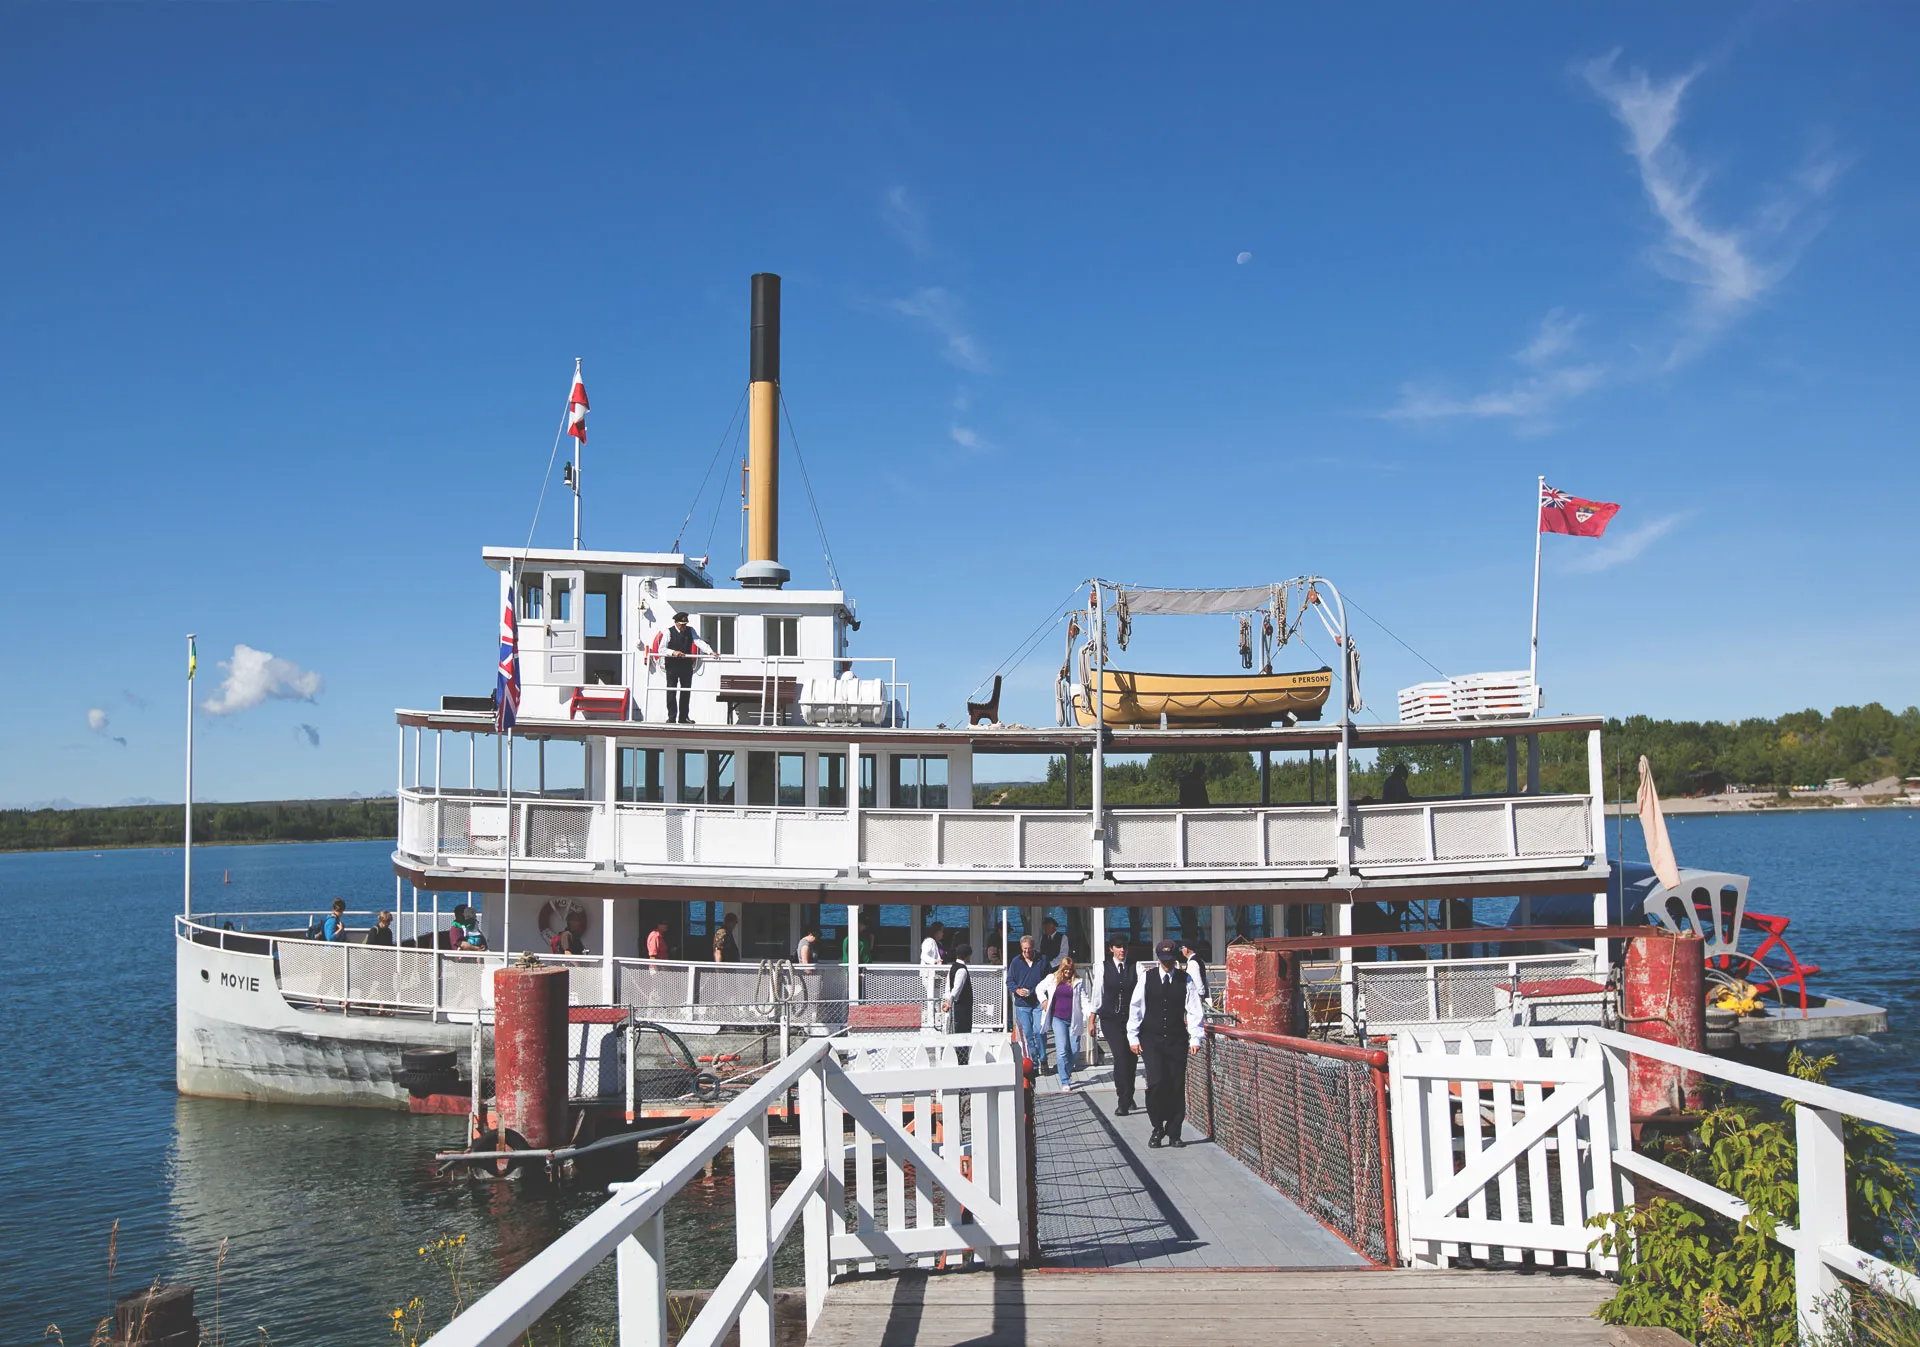 Ride the S.S. Moyie in the Glenmore Reservoir.